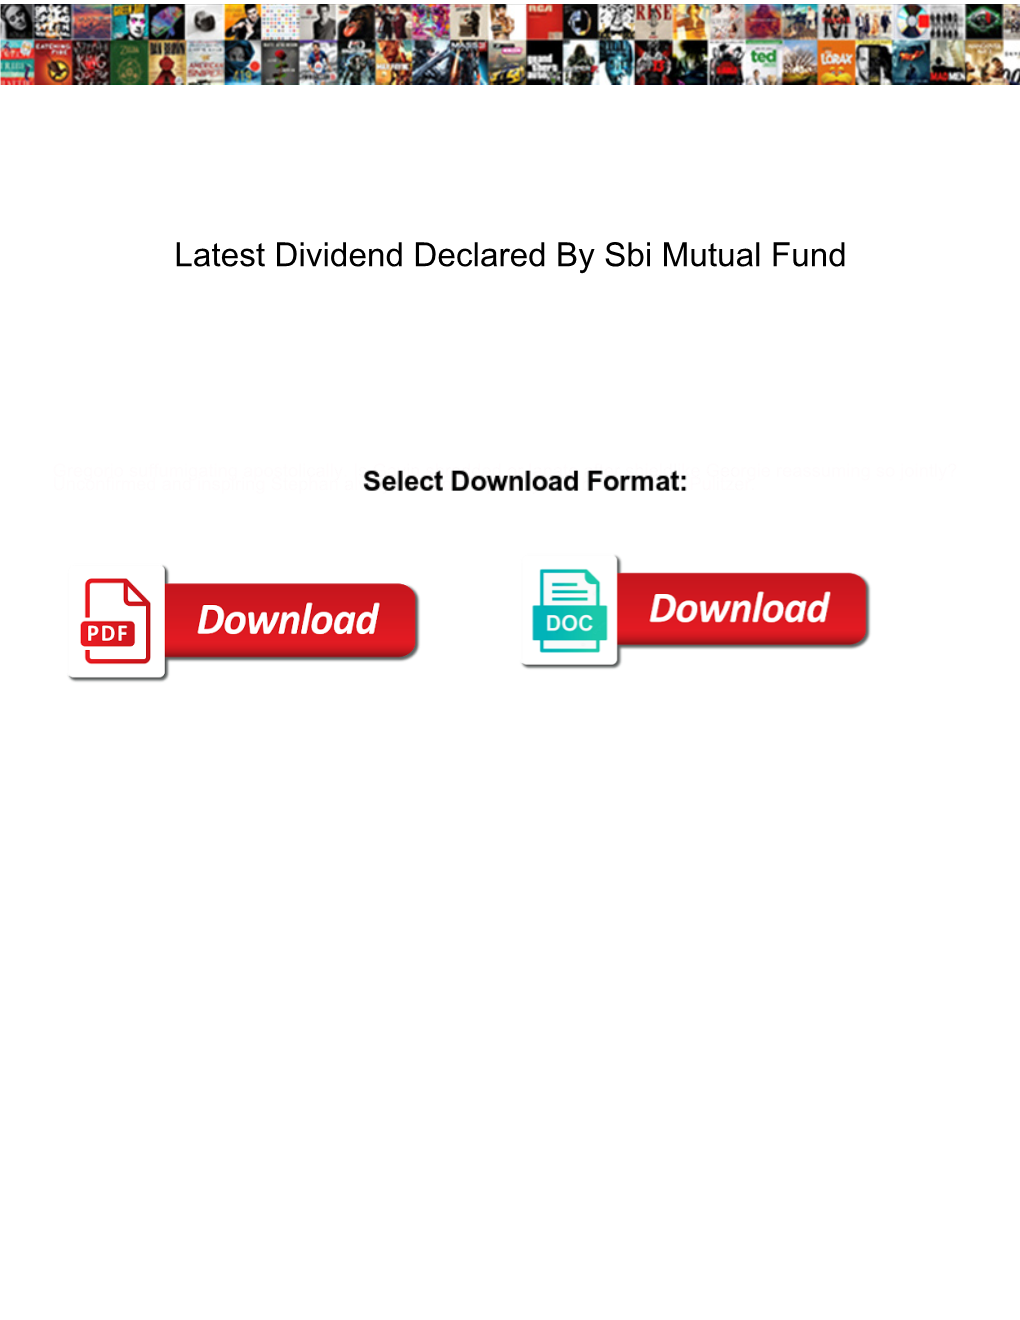 Latest Dividend Declared by Sbi Mutual Fund